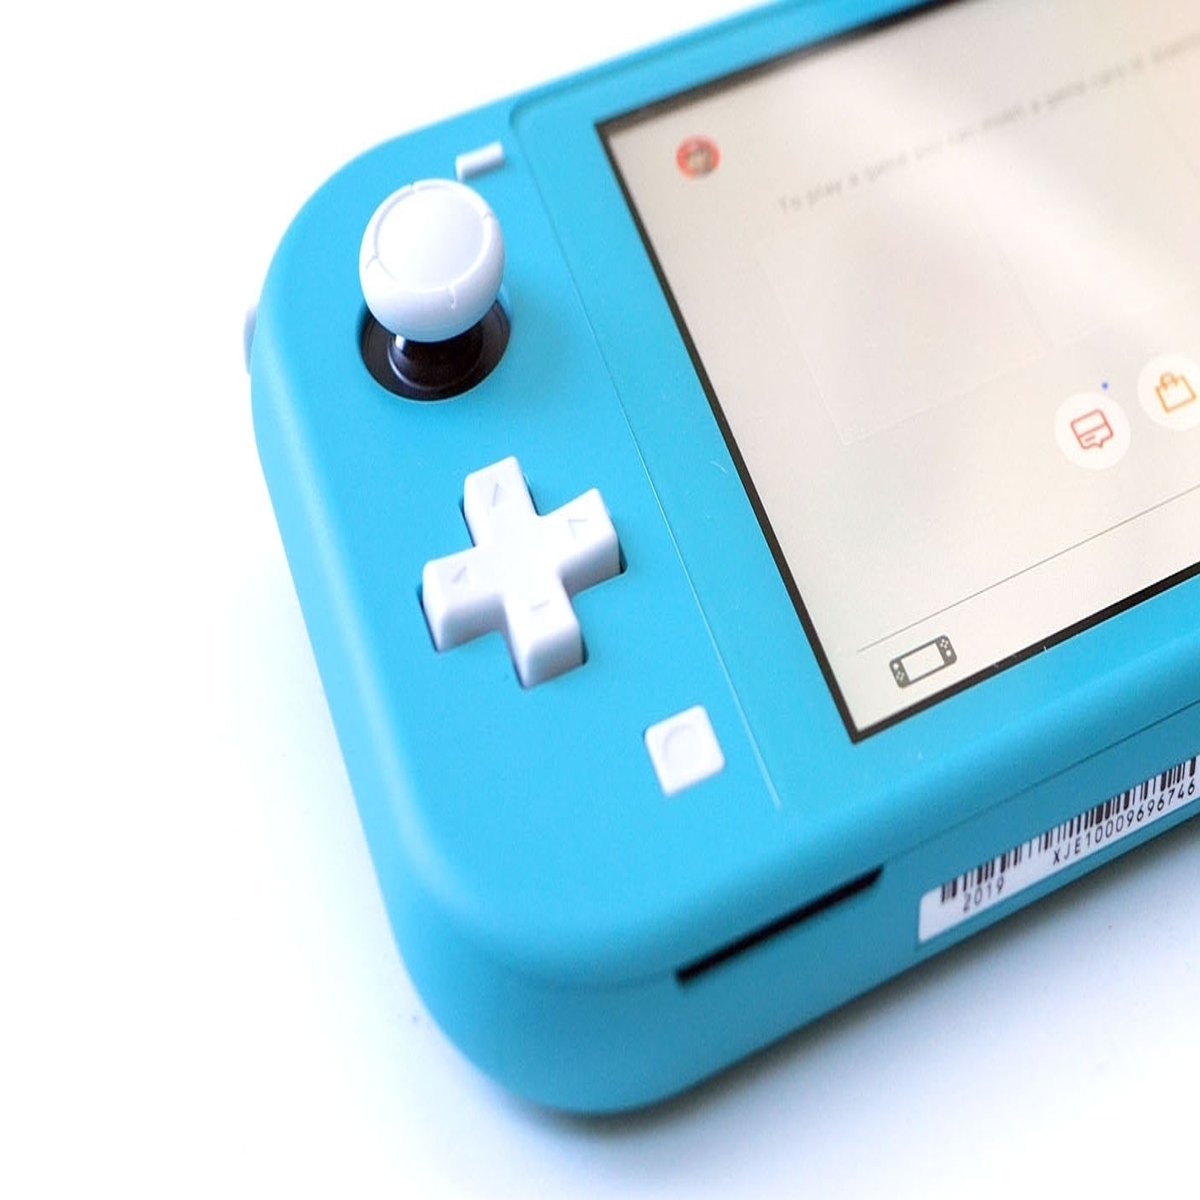 Nintendo Switch Lite review: Portable gaming at its finest